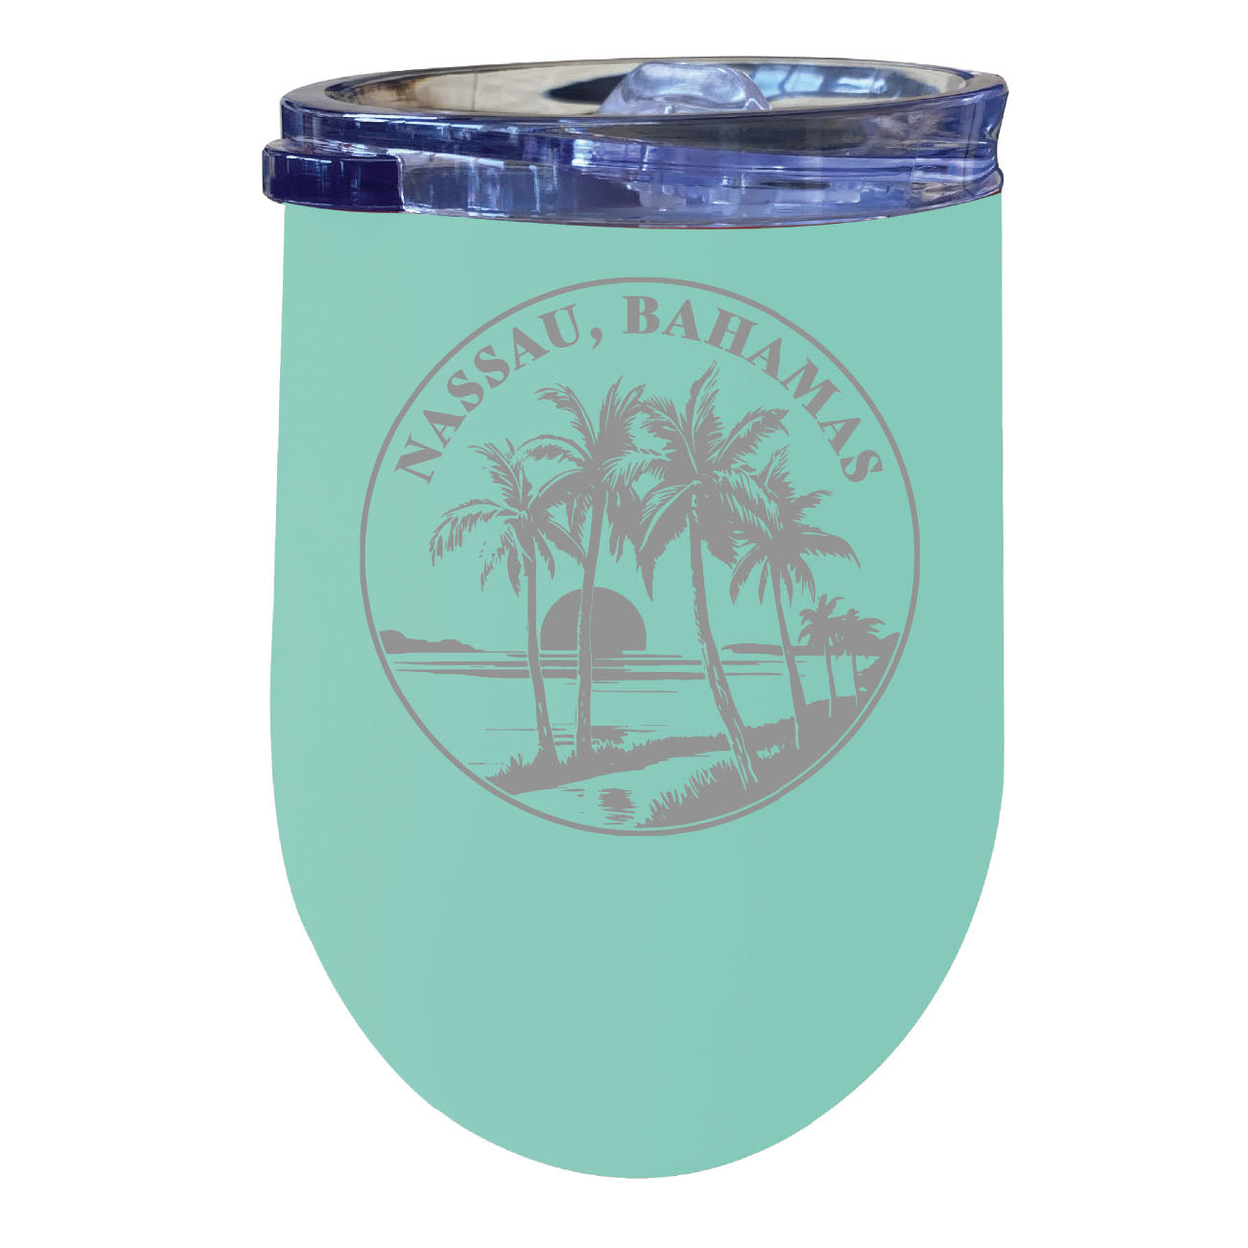 Nassau The Bahamas Souvenir 12 Oz Engraved Insulated Wine Stainless Steel Tumbler - Seafoam,,4-Pack